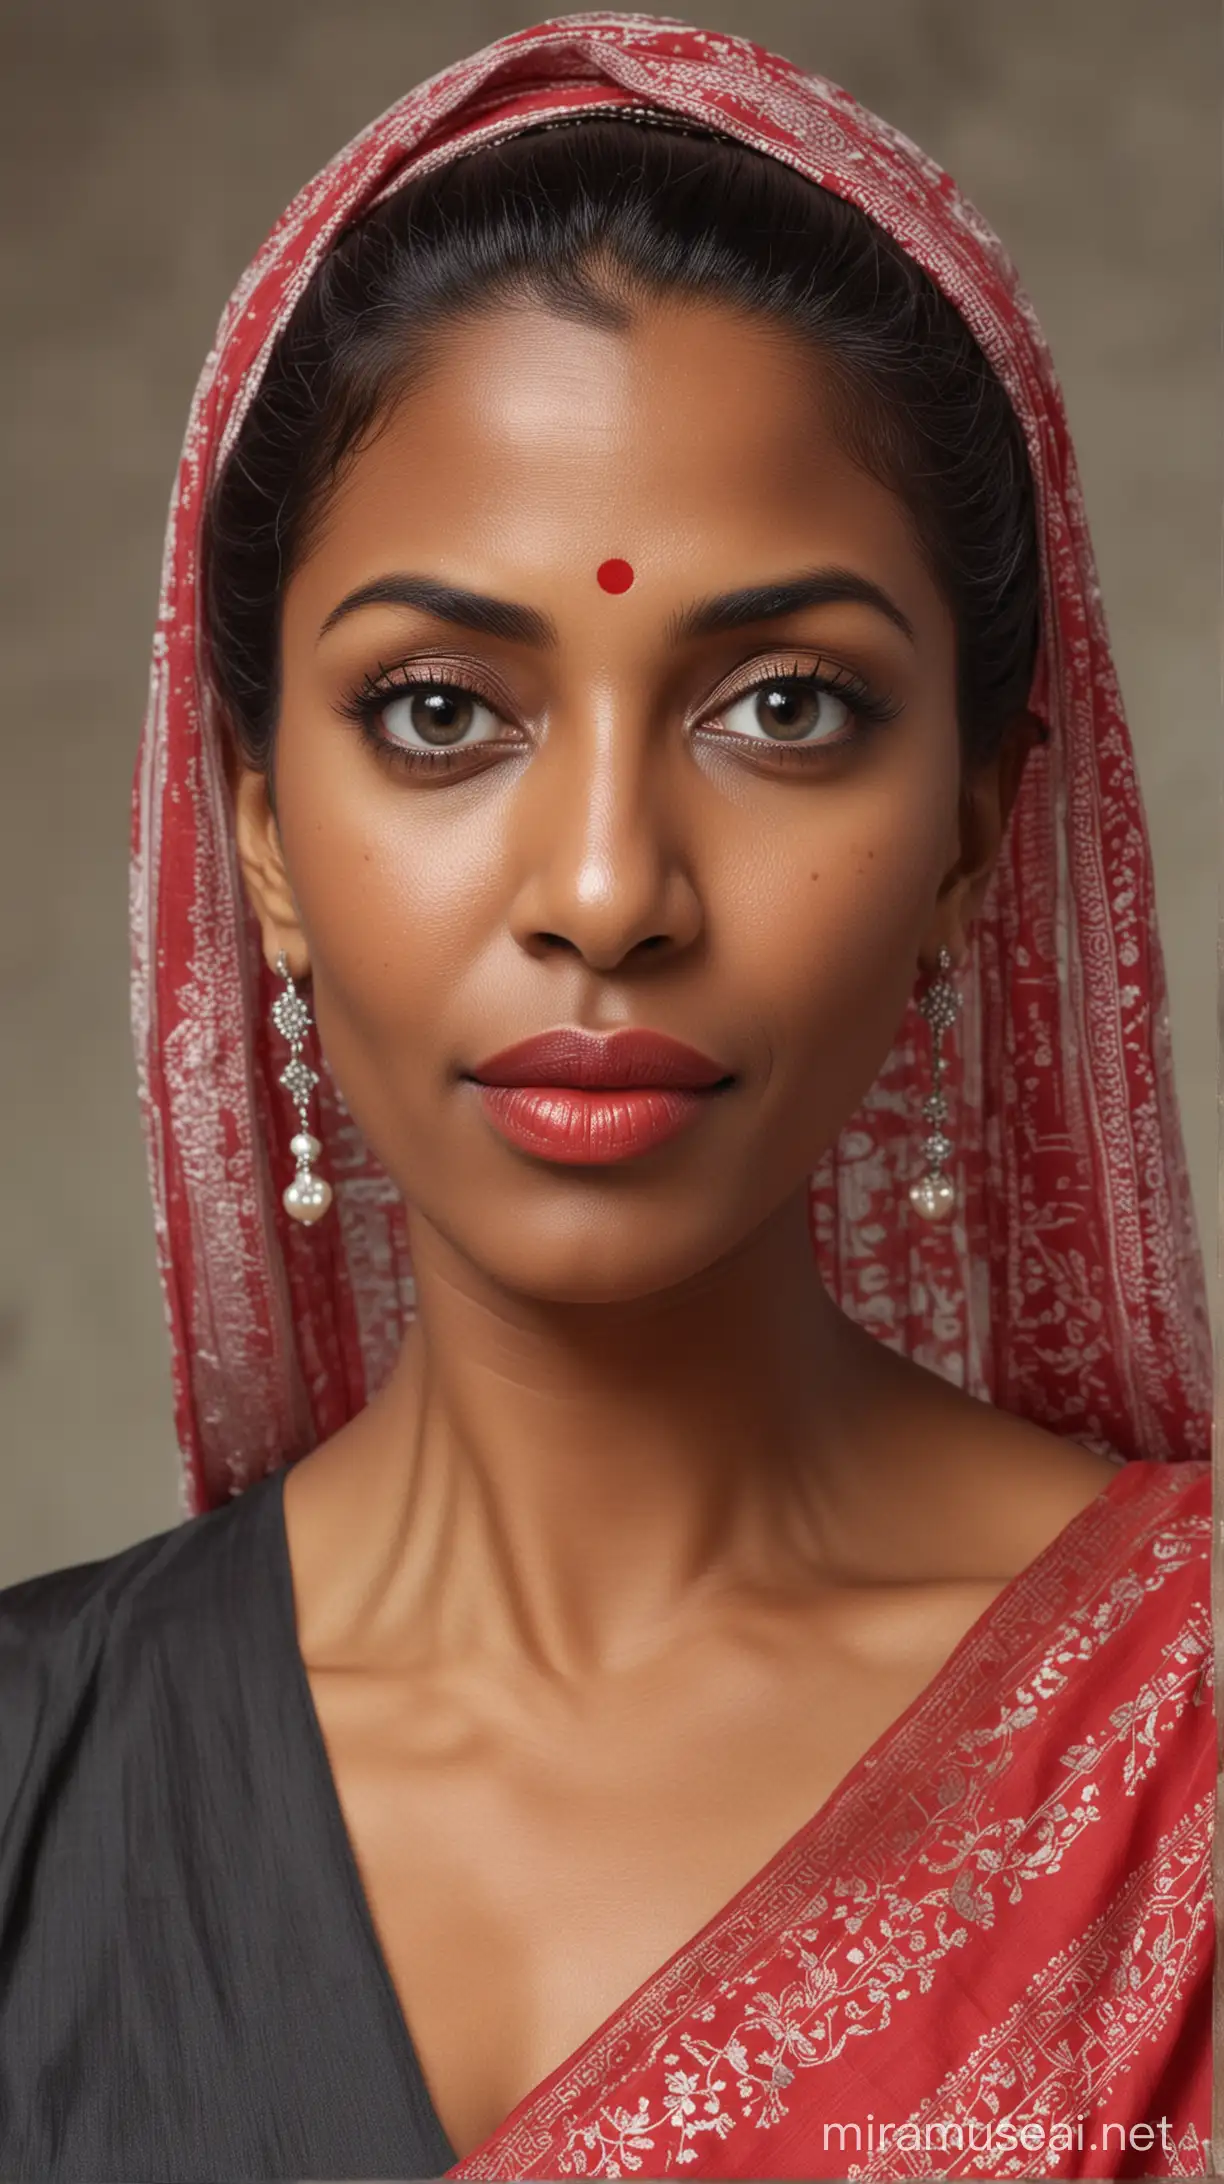 Elegant Black Woman in Traditional Saree with Veil